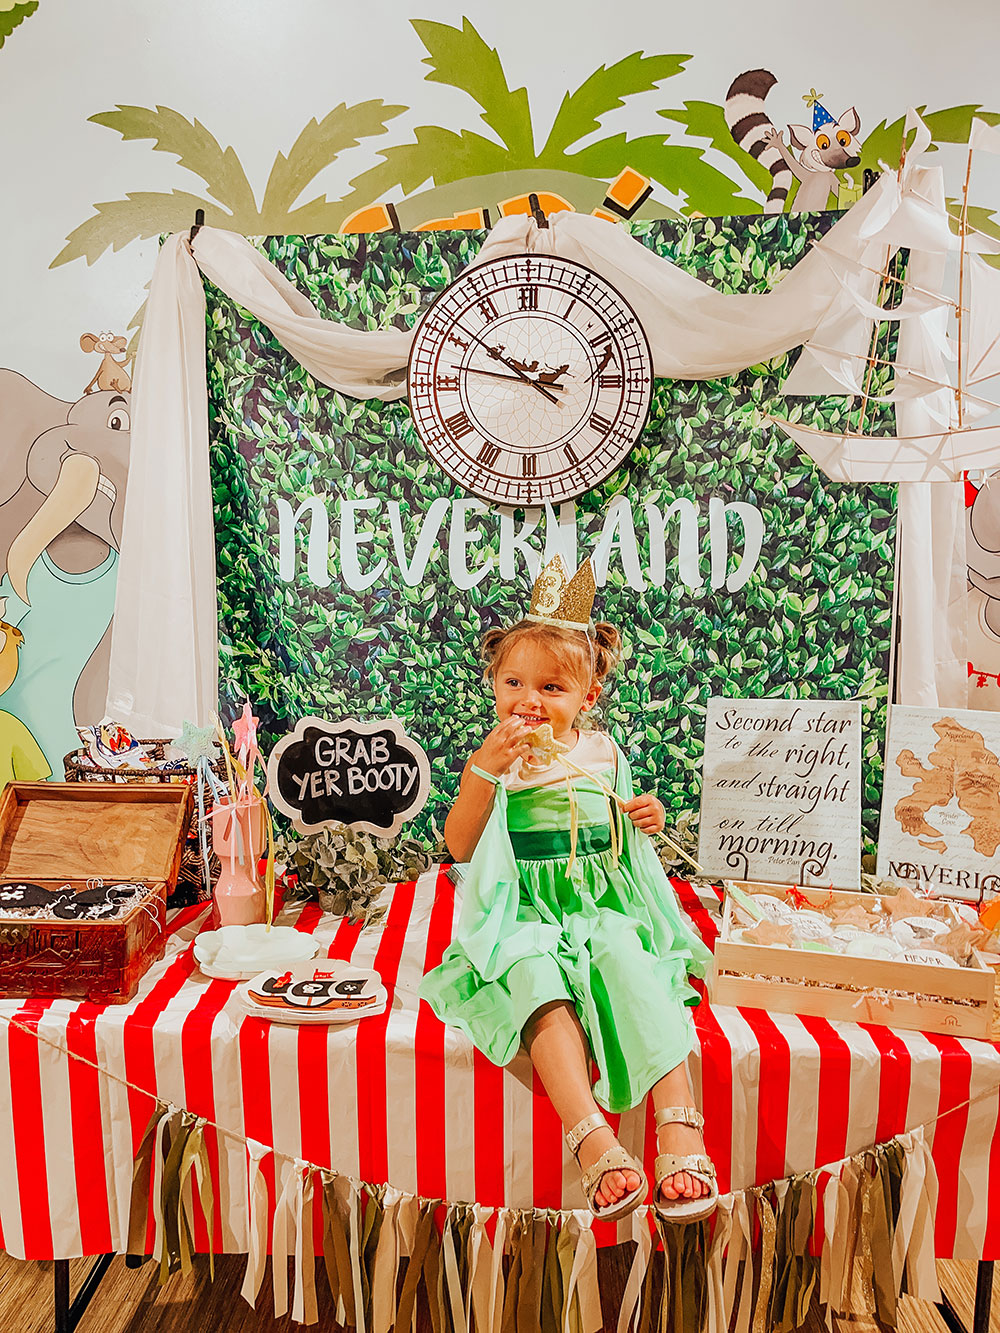 peter pan kids birthday party ideas - tinkerbell costume